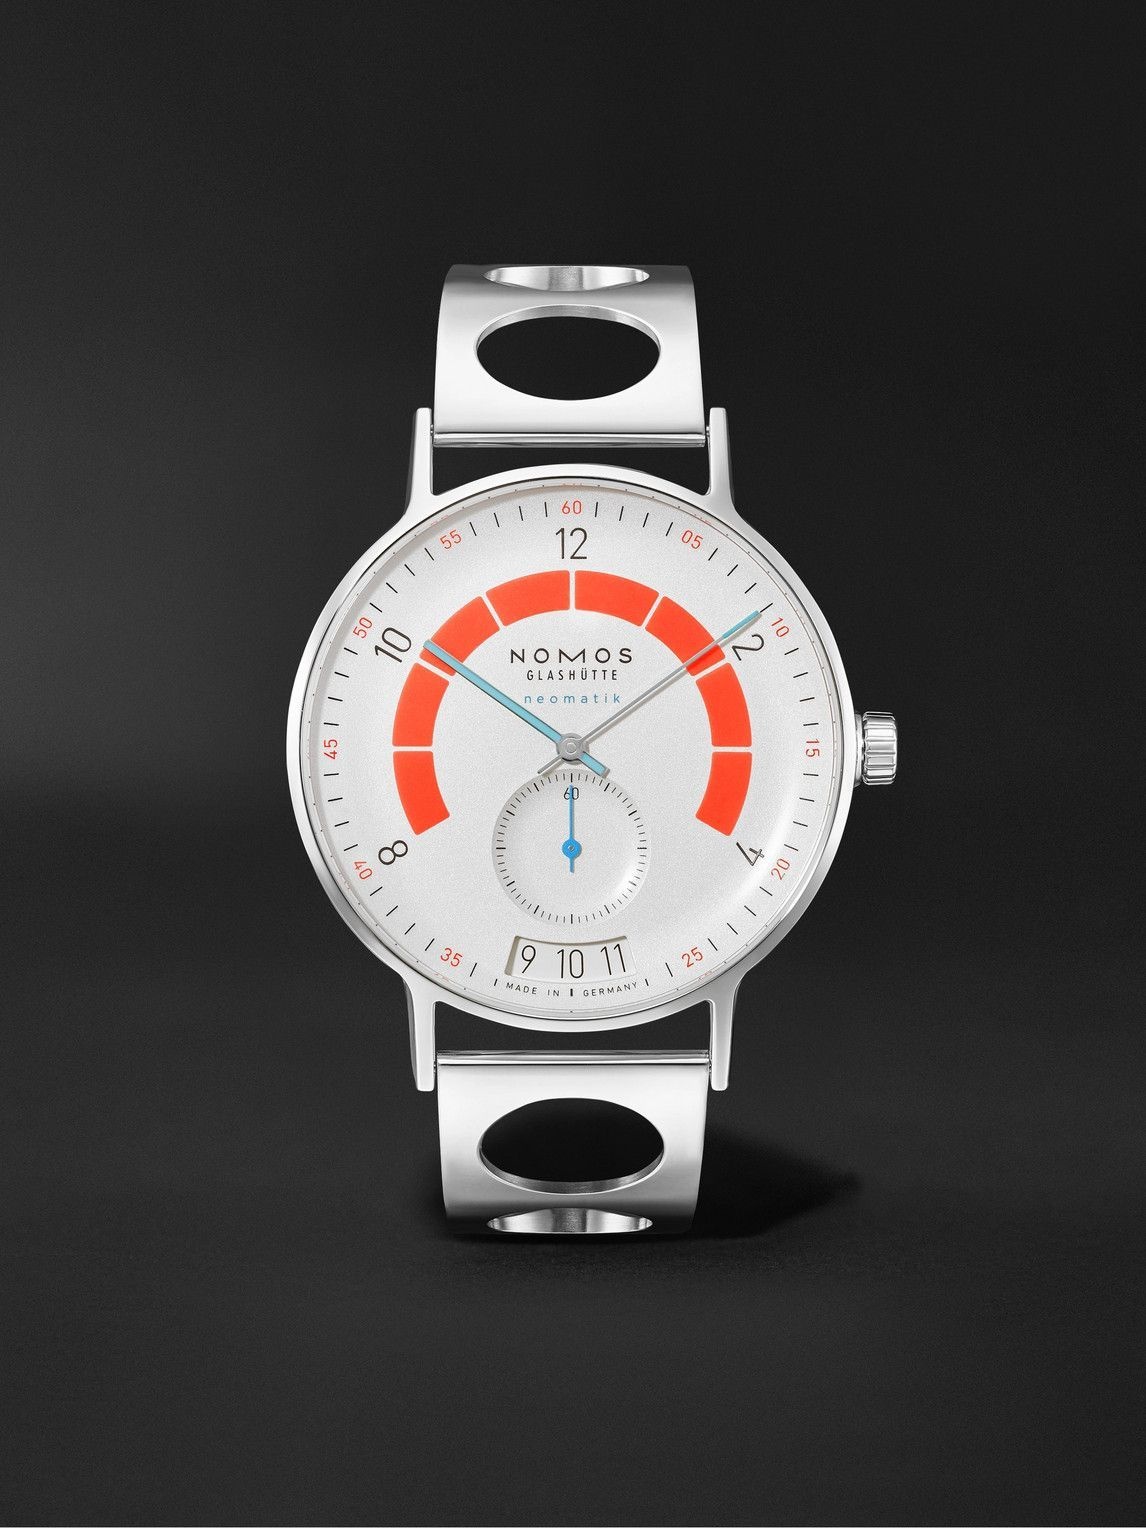 Photo: NOMOS Glashütte - Autobahn Director's Cut A3 Limited Edition Automatic 41mm Stainless Steel Watch, Ref. No. 1301.S1